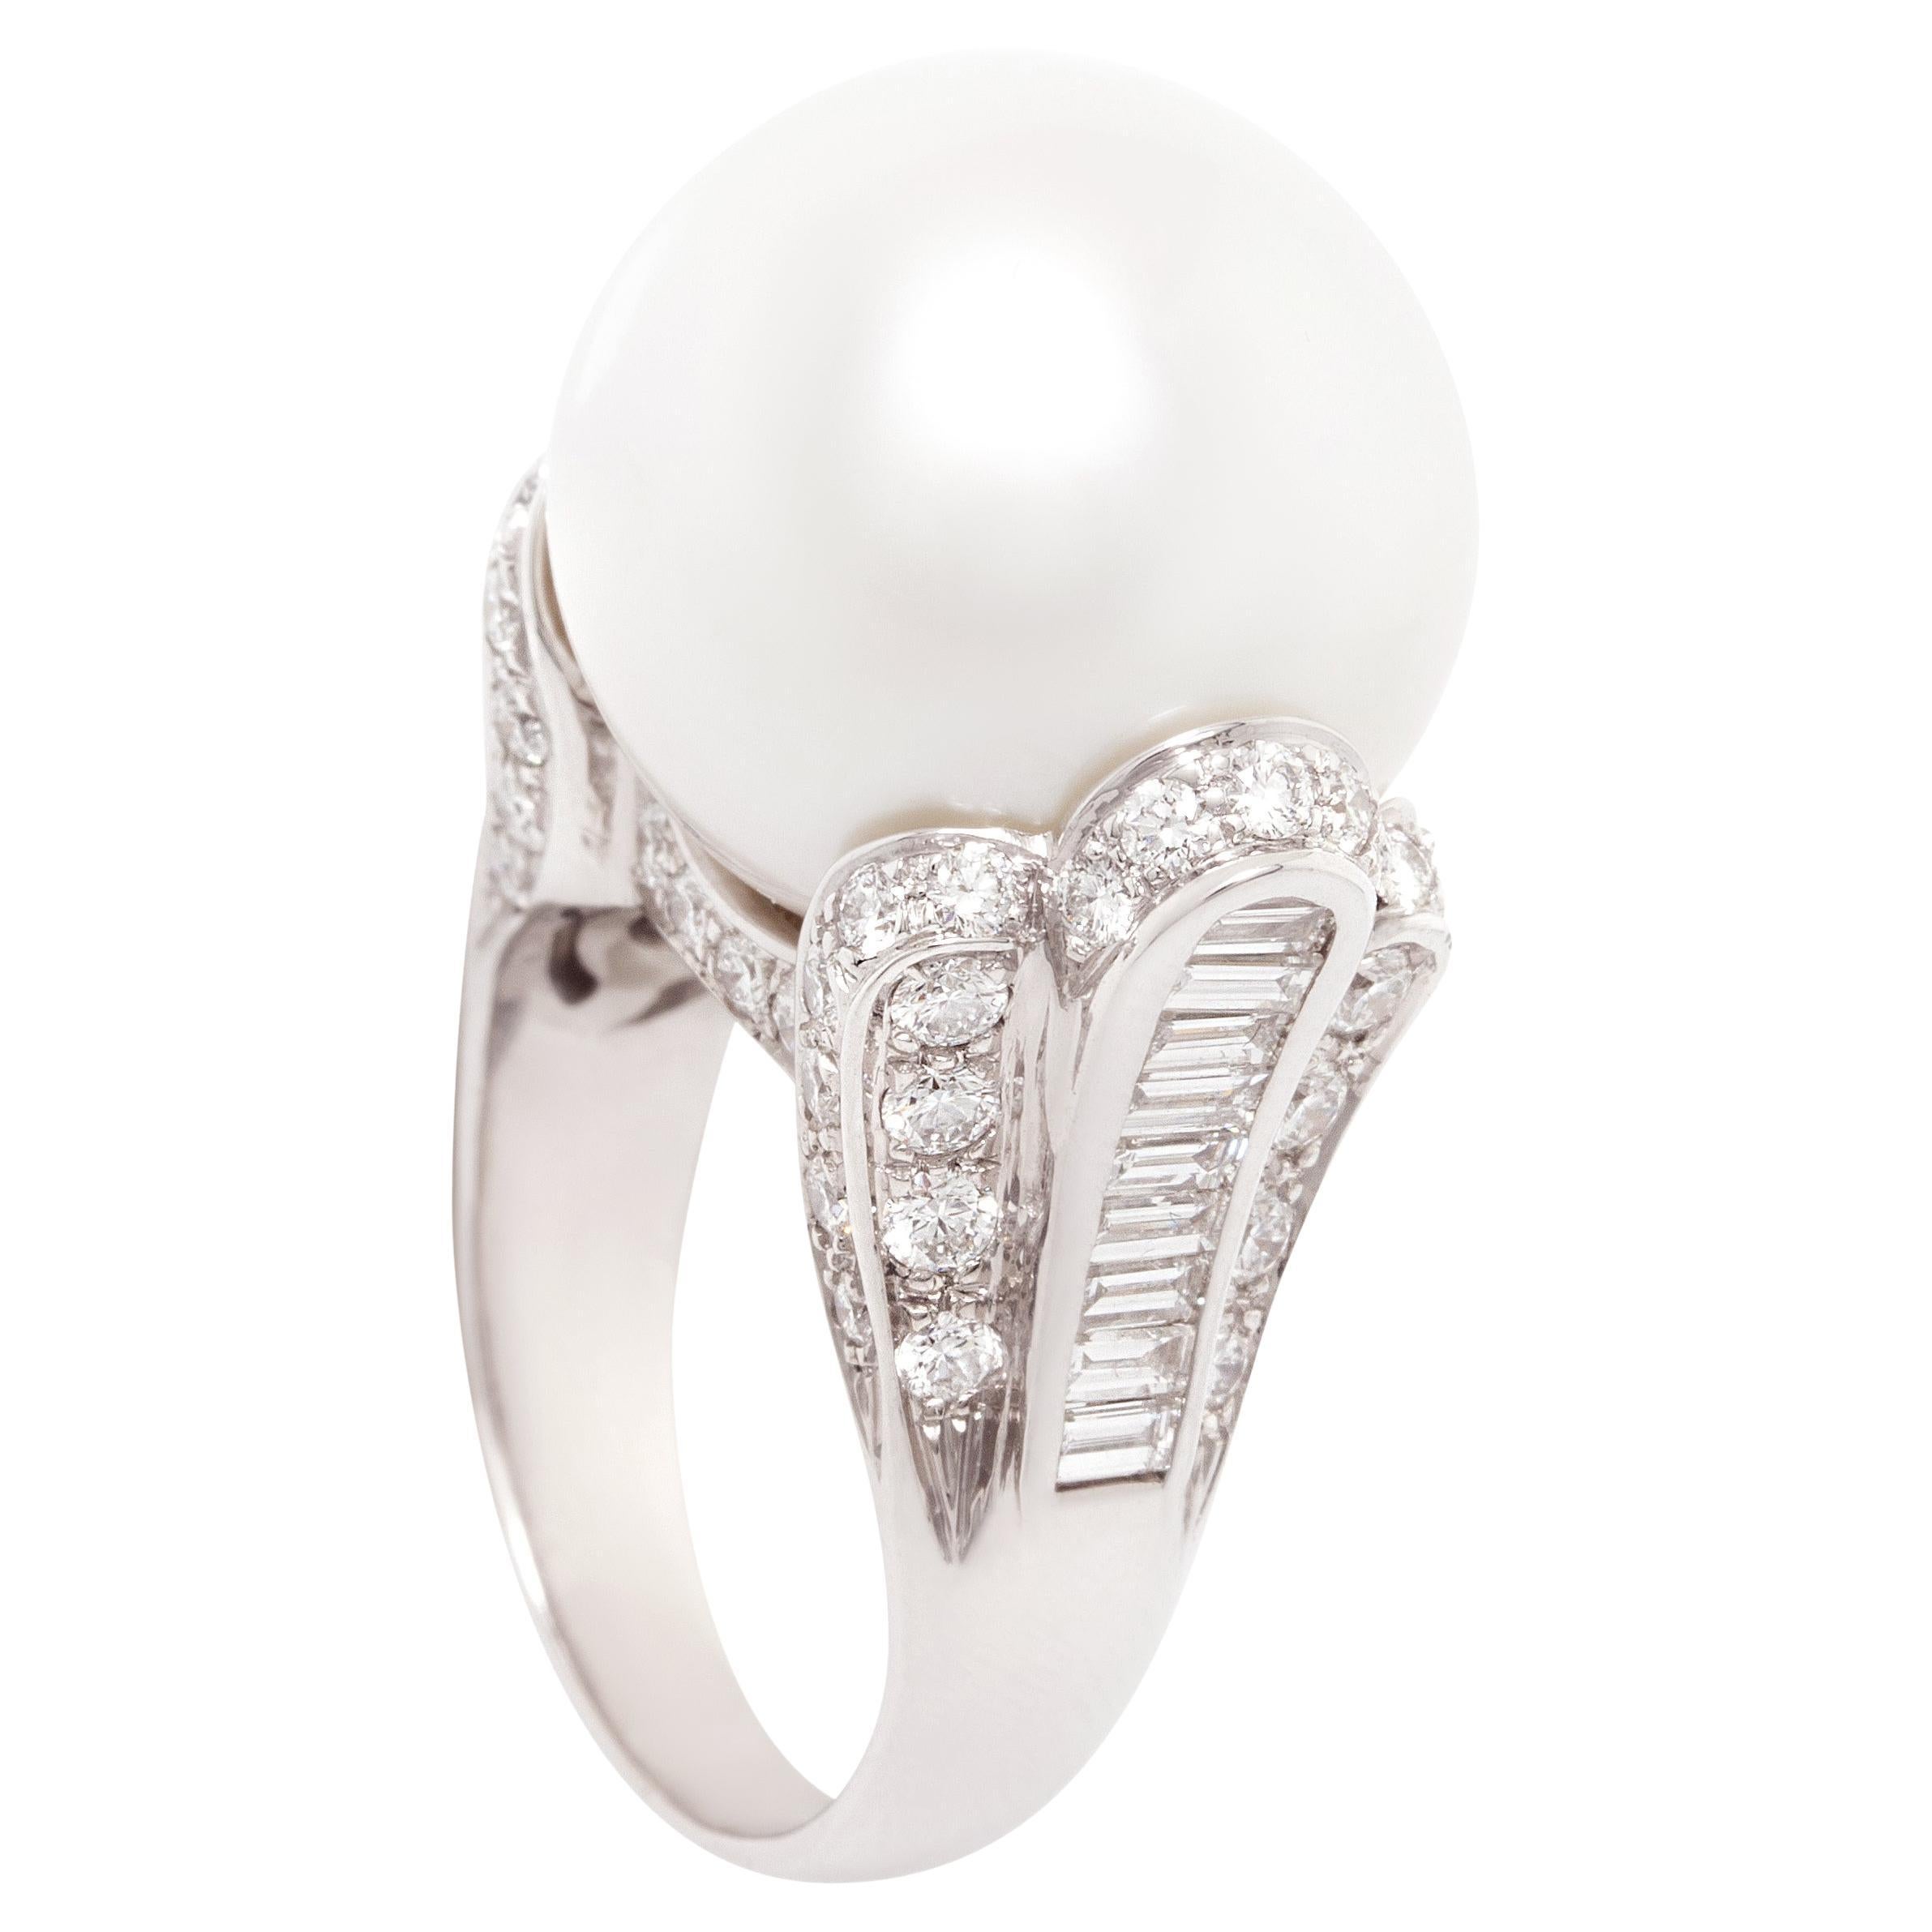 Ella Gafter South Sea Pearl 18mm Diamond Cocktail Ring